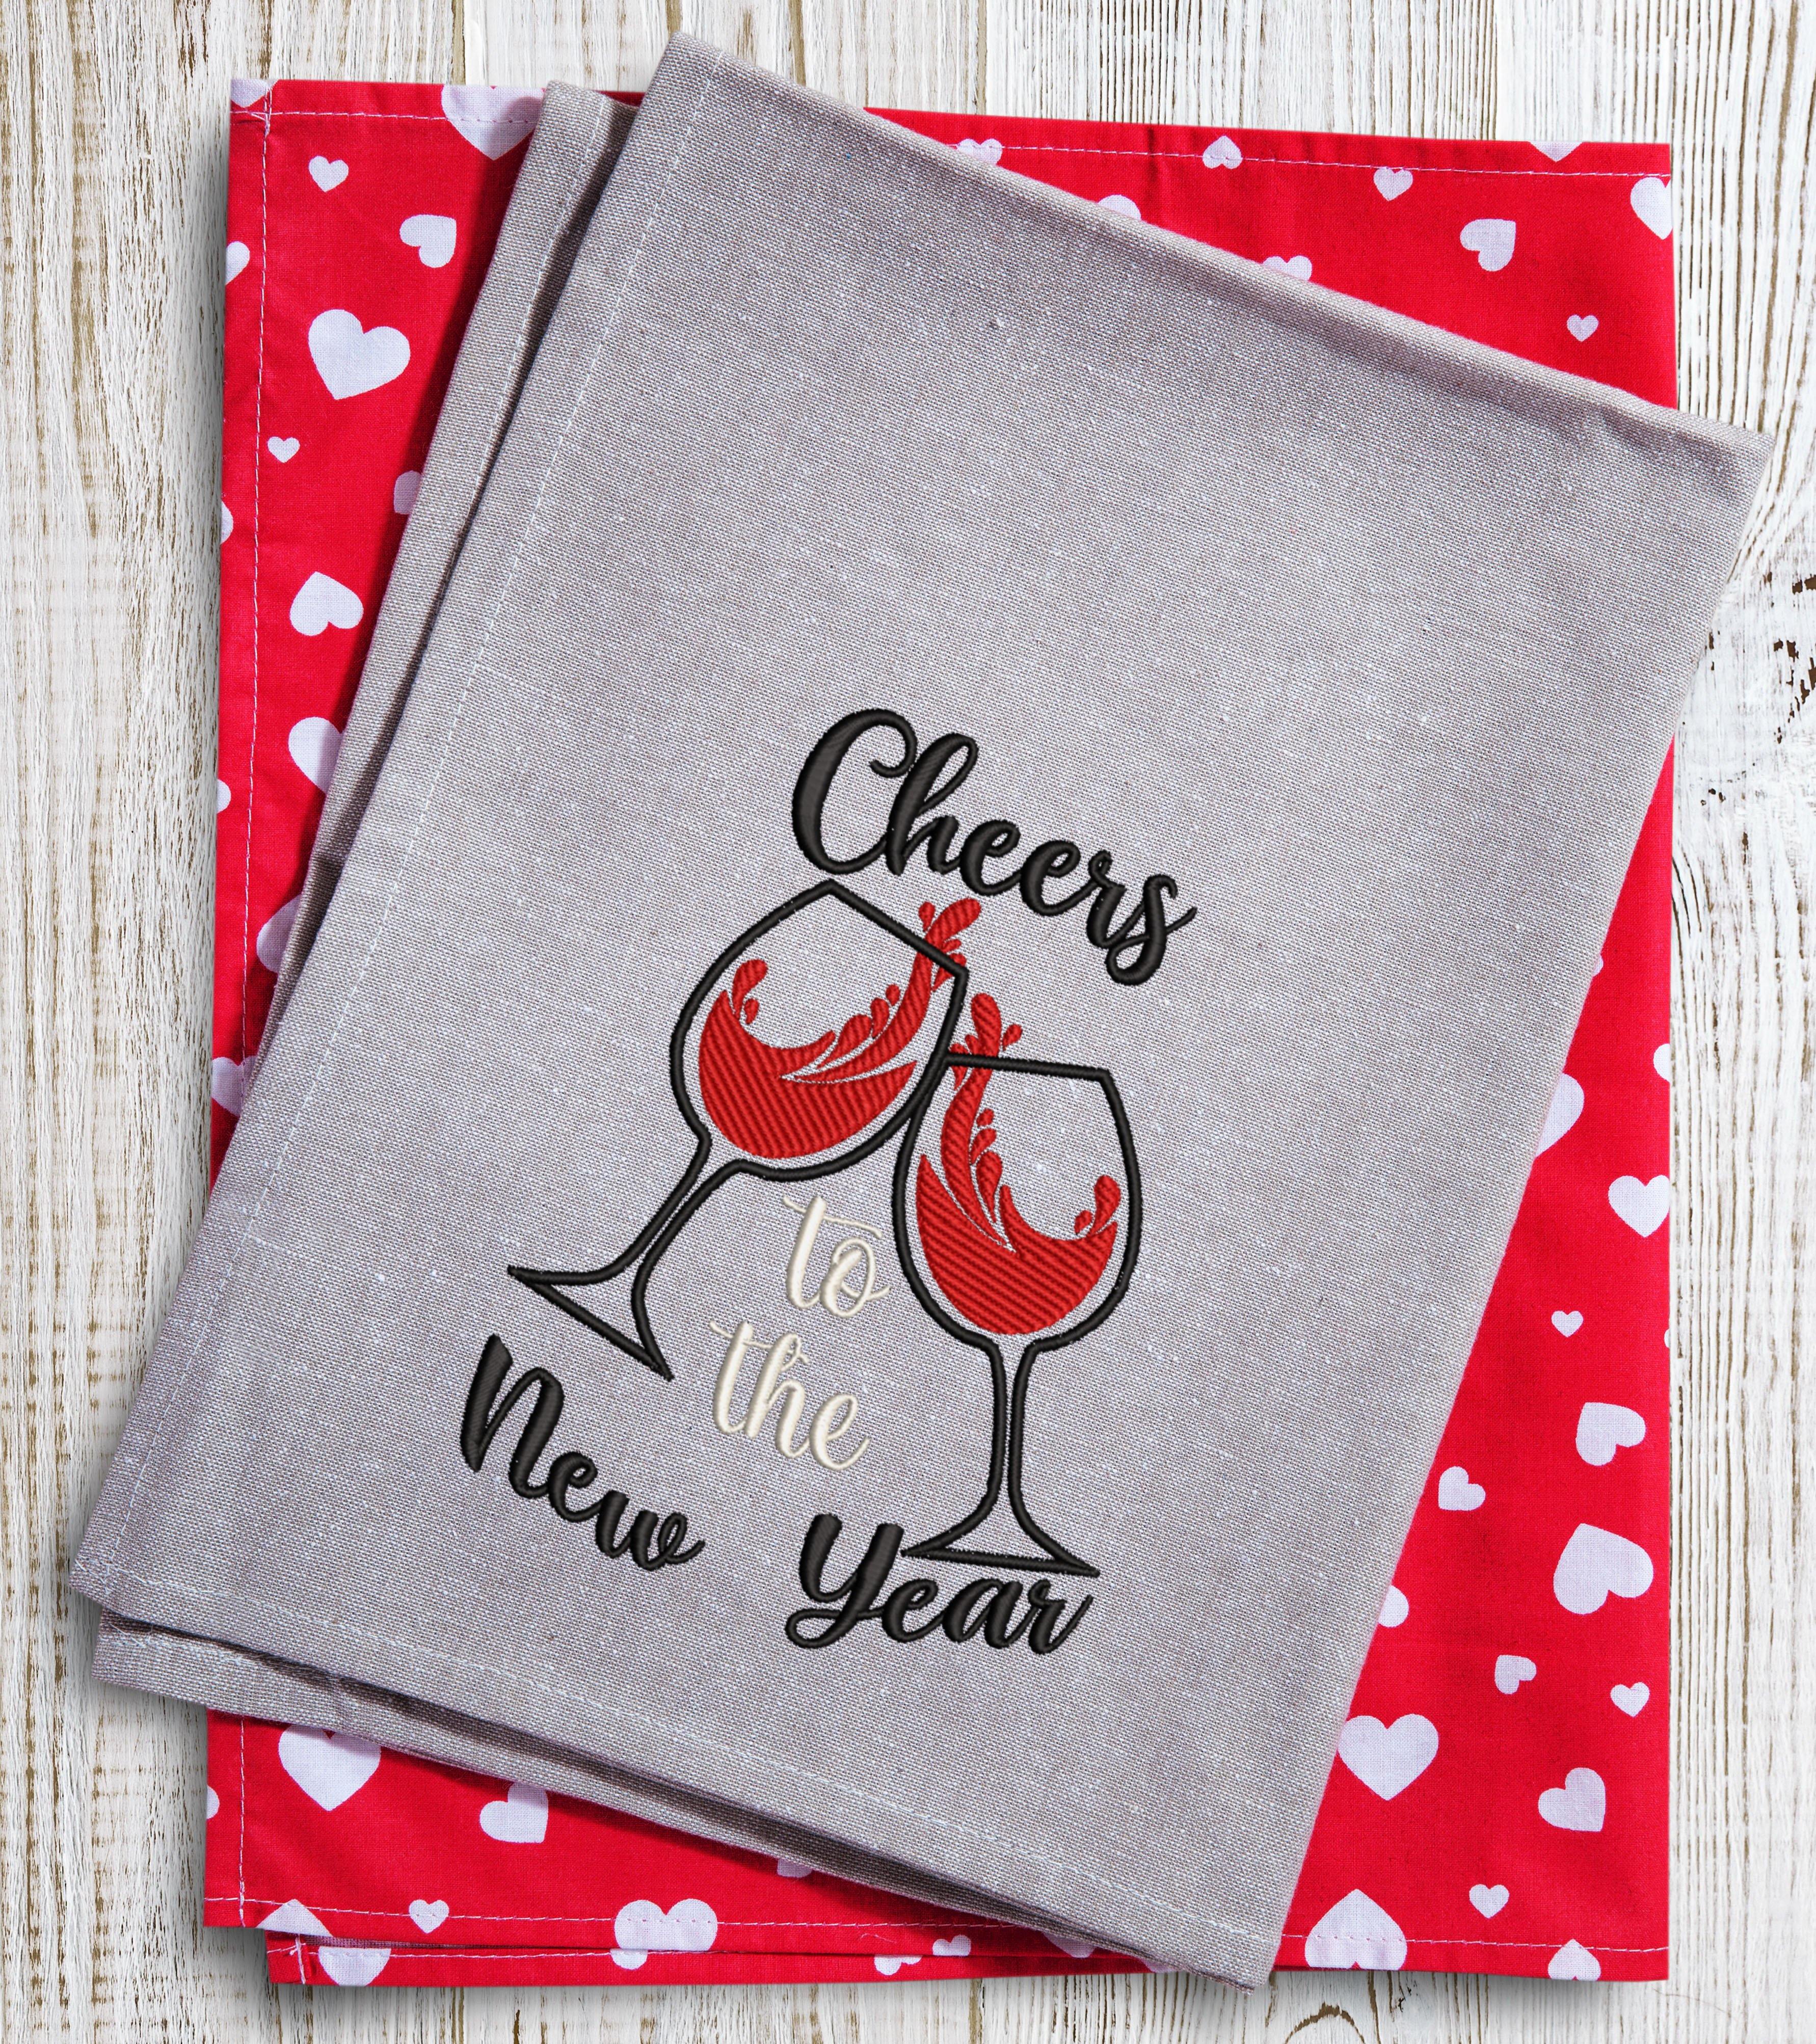 Cheers to the New Year Embroidery Design - Oh My Crafty Supplies Inc.